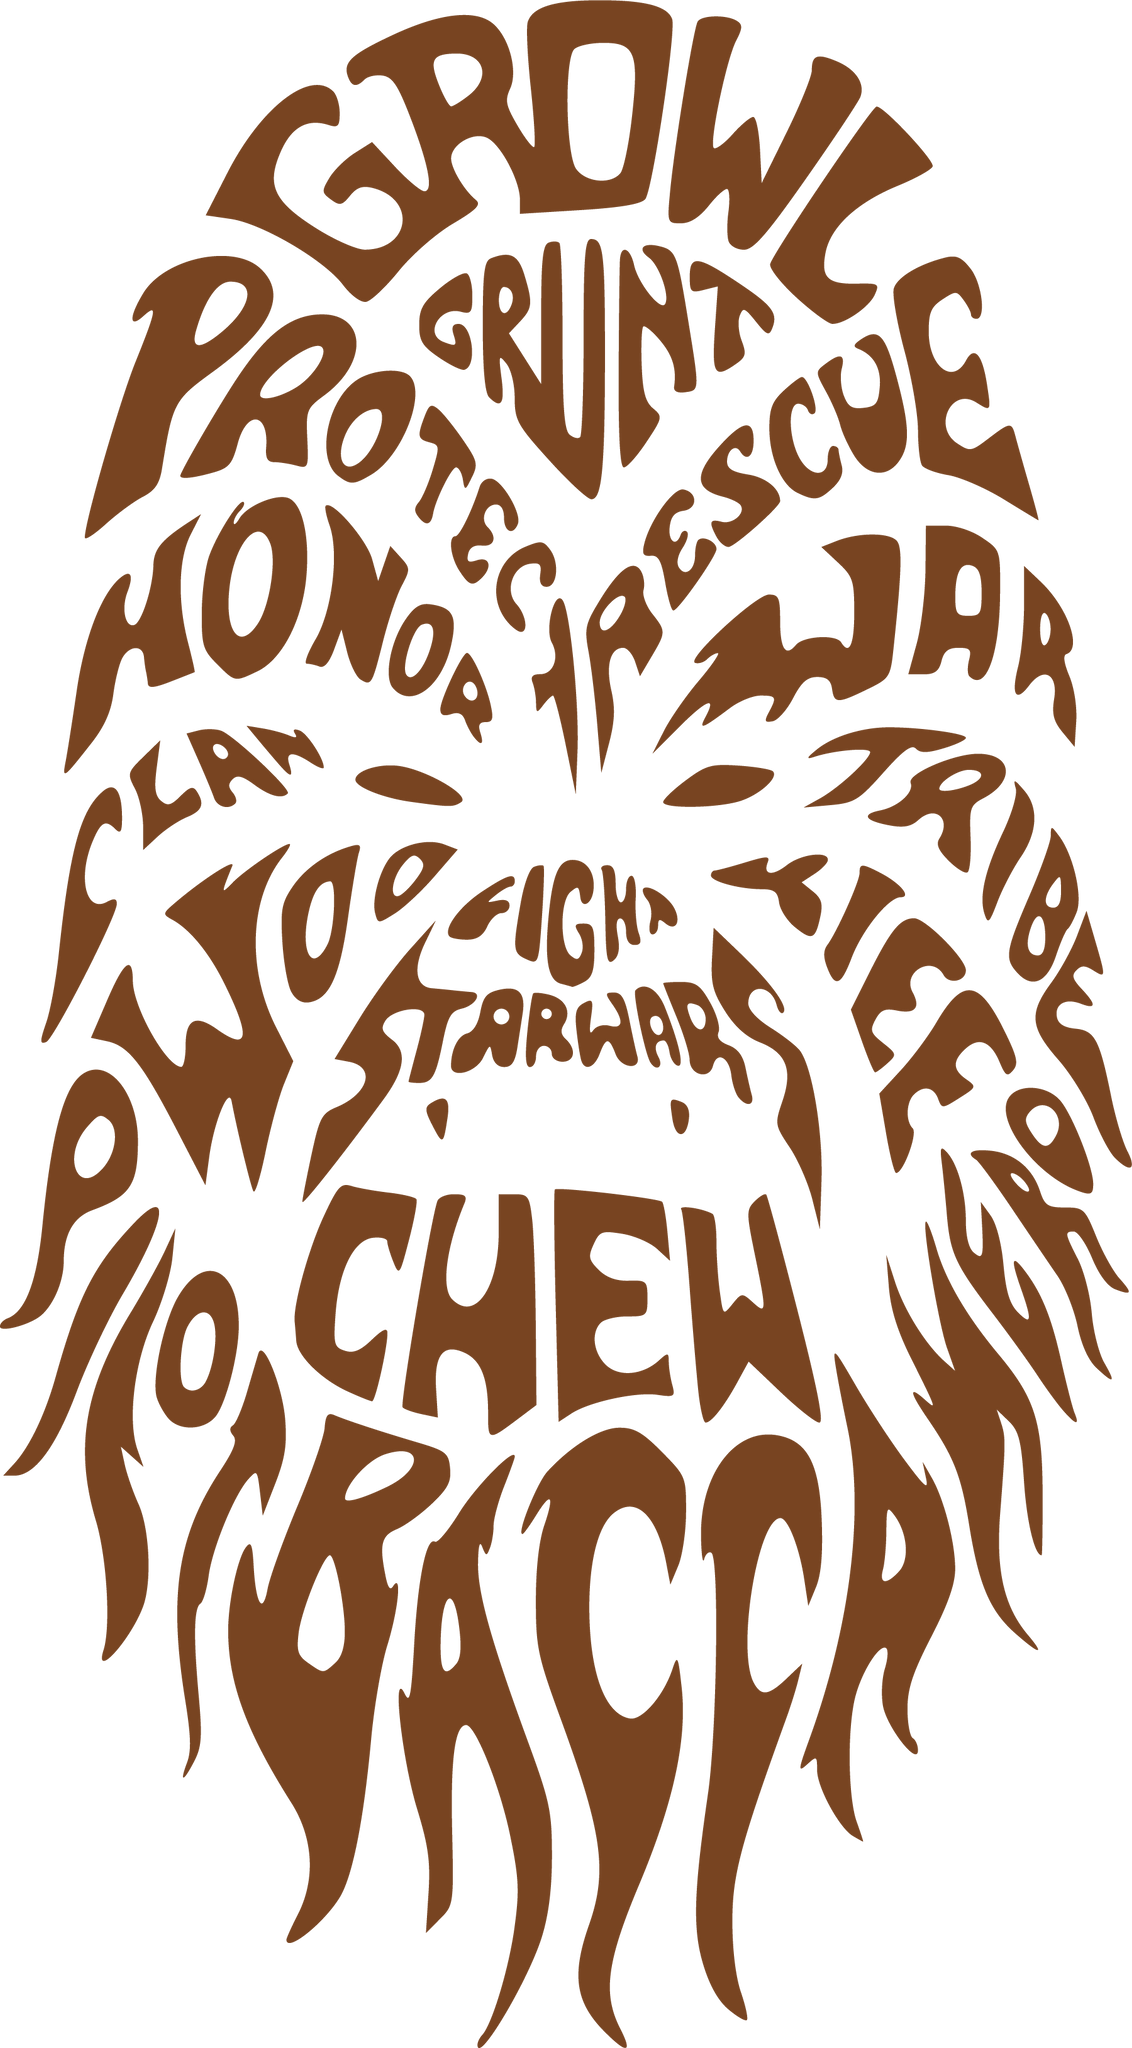 Download Chewbacca | Star Wars SVG DXF EPS PNG Cut File | Cricut ...